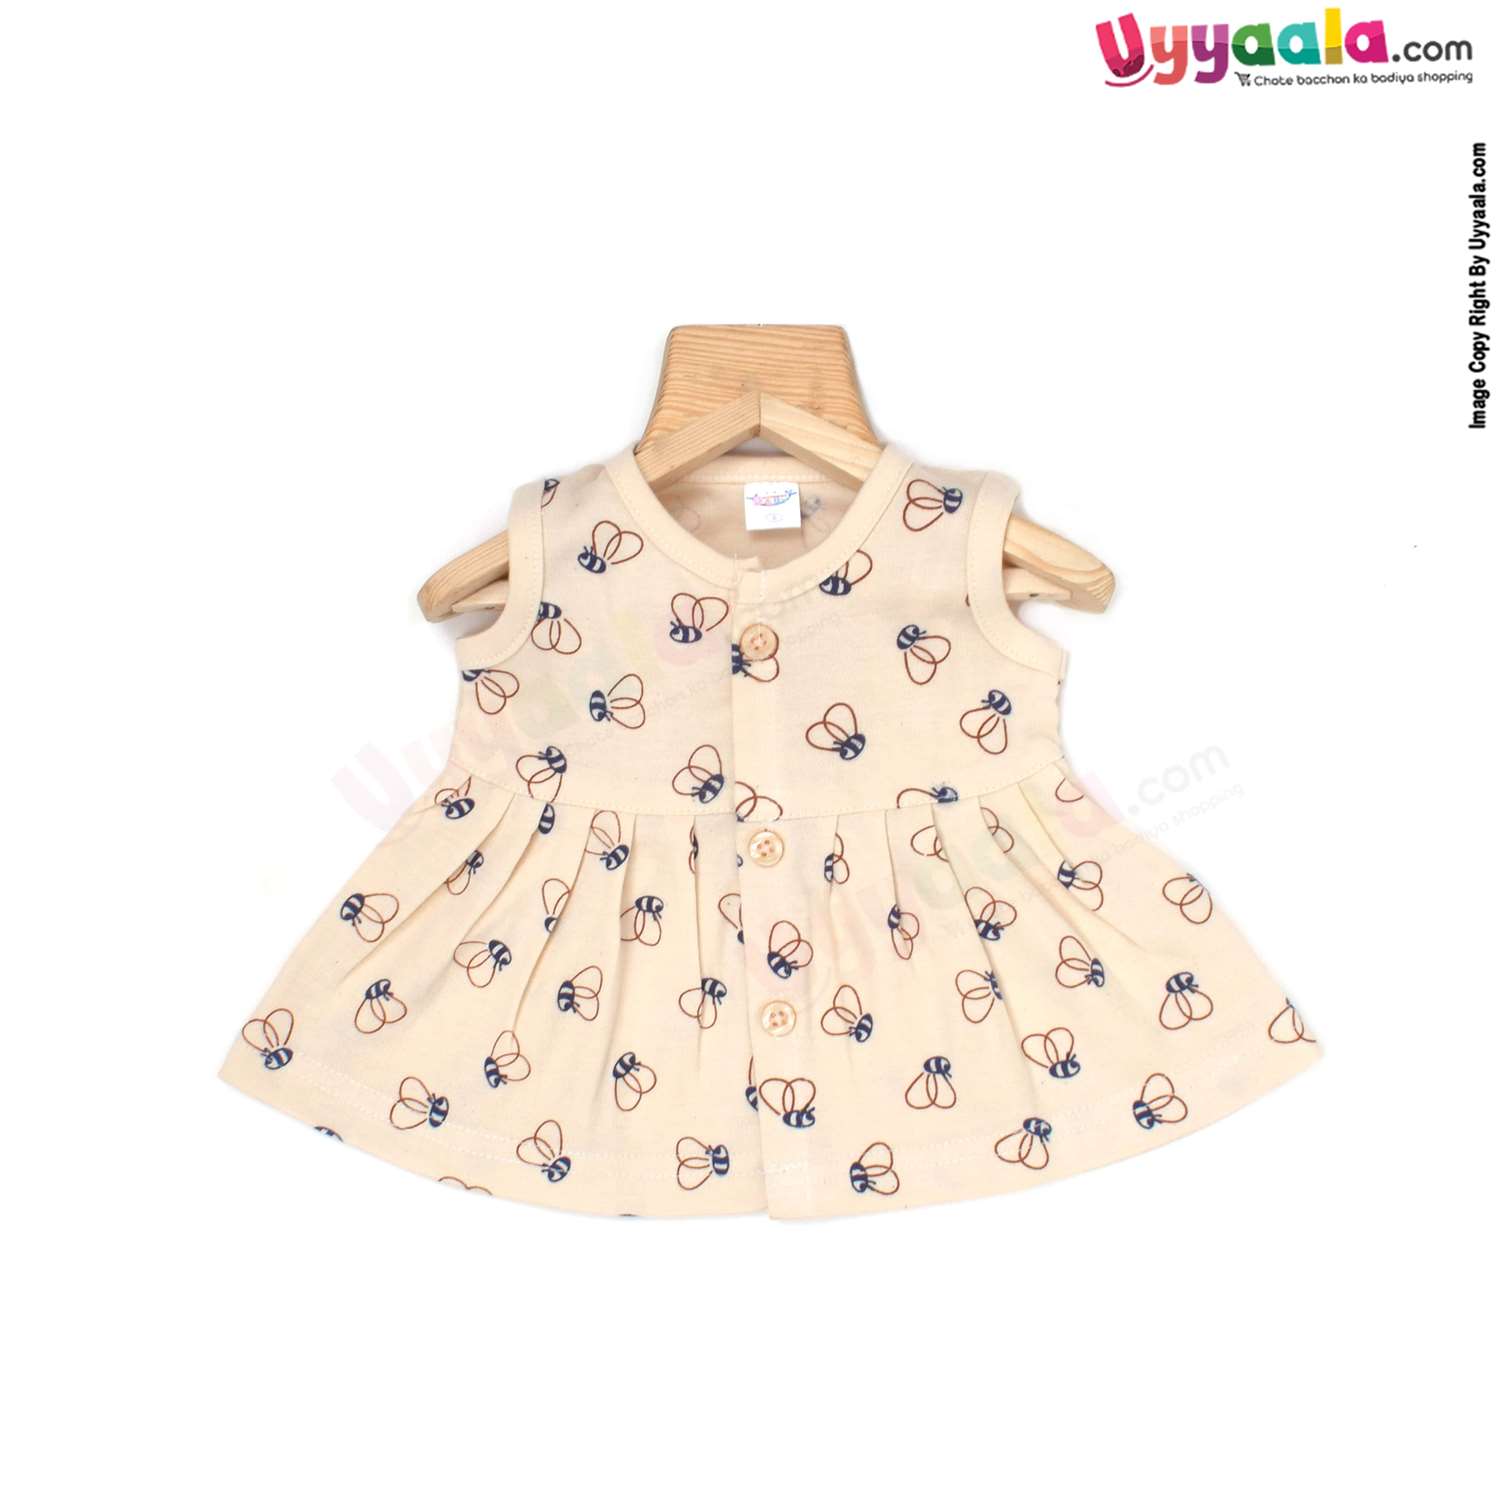 MOMMAS Sleeveless Newborn Baby Frock, Front Opening Button Model, Premium Quality Cotton Baby Wear, (0-3M)